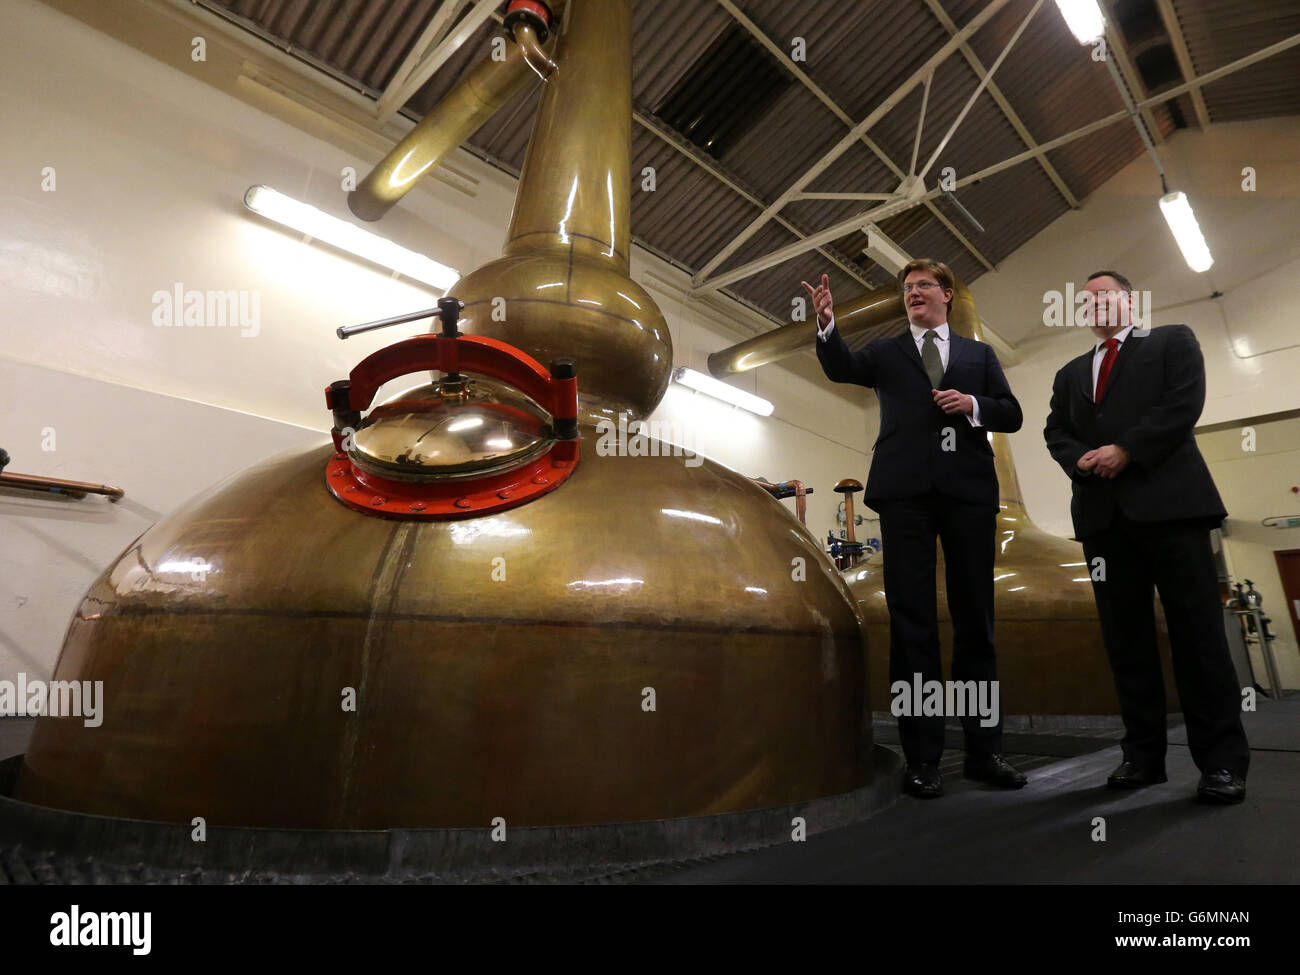 New Scotch Whisky Association Chief David Frost (right) talks to Chief Secretary to the Treasury Danny Alexander in the stills room during a visit to Benromach distillery in Forres, near Inverness, as he launches the Spirit Drinks Verification Scheme. PRESS ASSOCIATION Photo. Picture date: Thursday January 9, 2014. See PA story POLITICS Spirits. Photo credit should read: Andrew Milligan/PA Wire Stock Photo